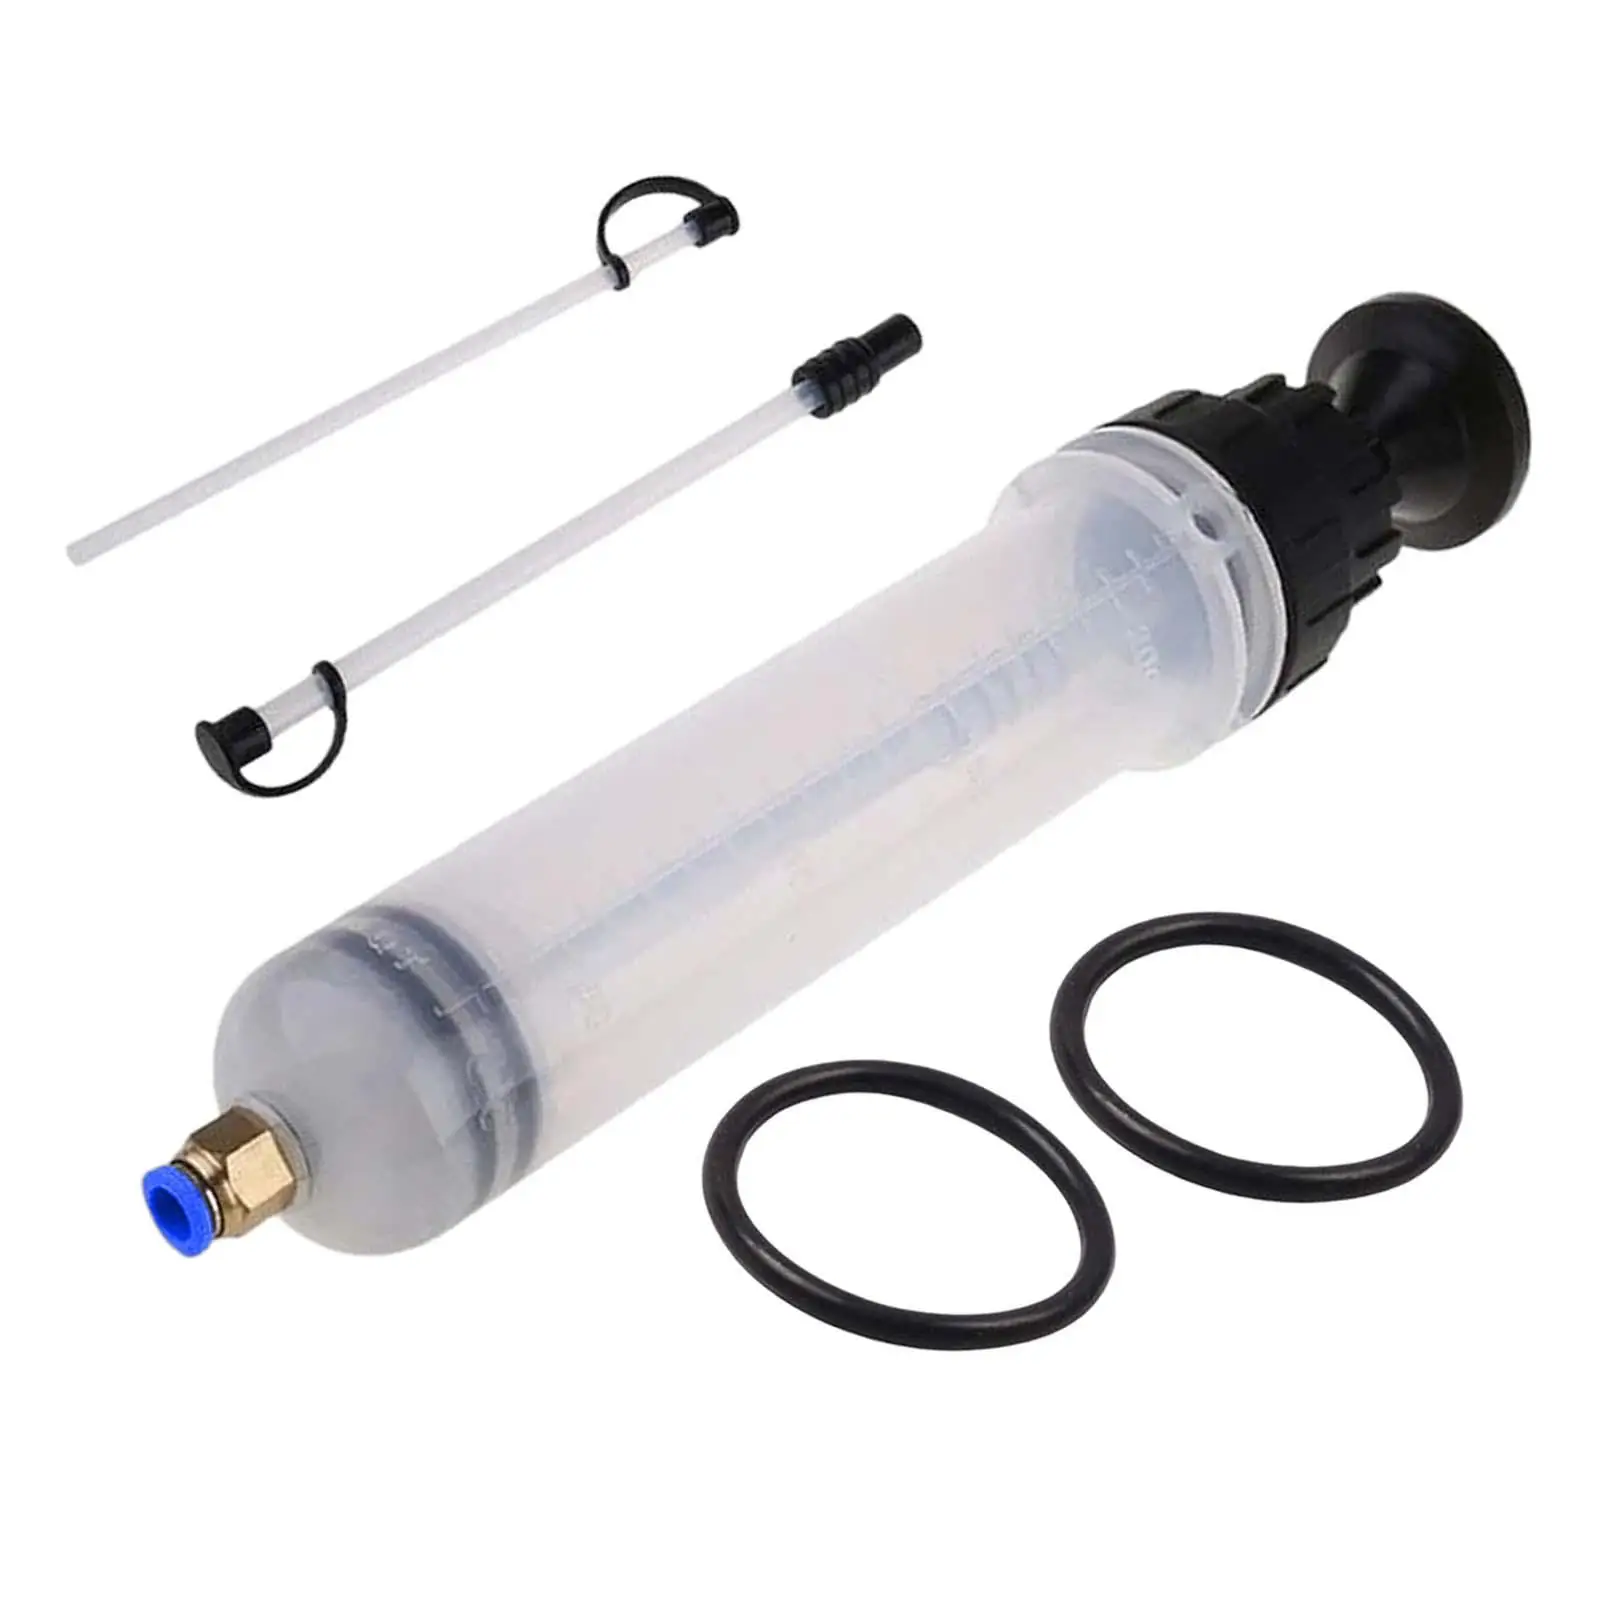 Auto Brake Fluid Extractor Fluid Transfer Hand Pump Tool for Motorcycle